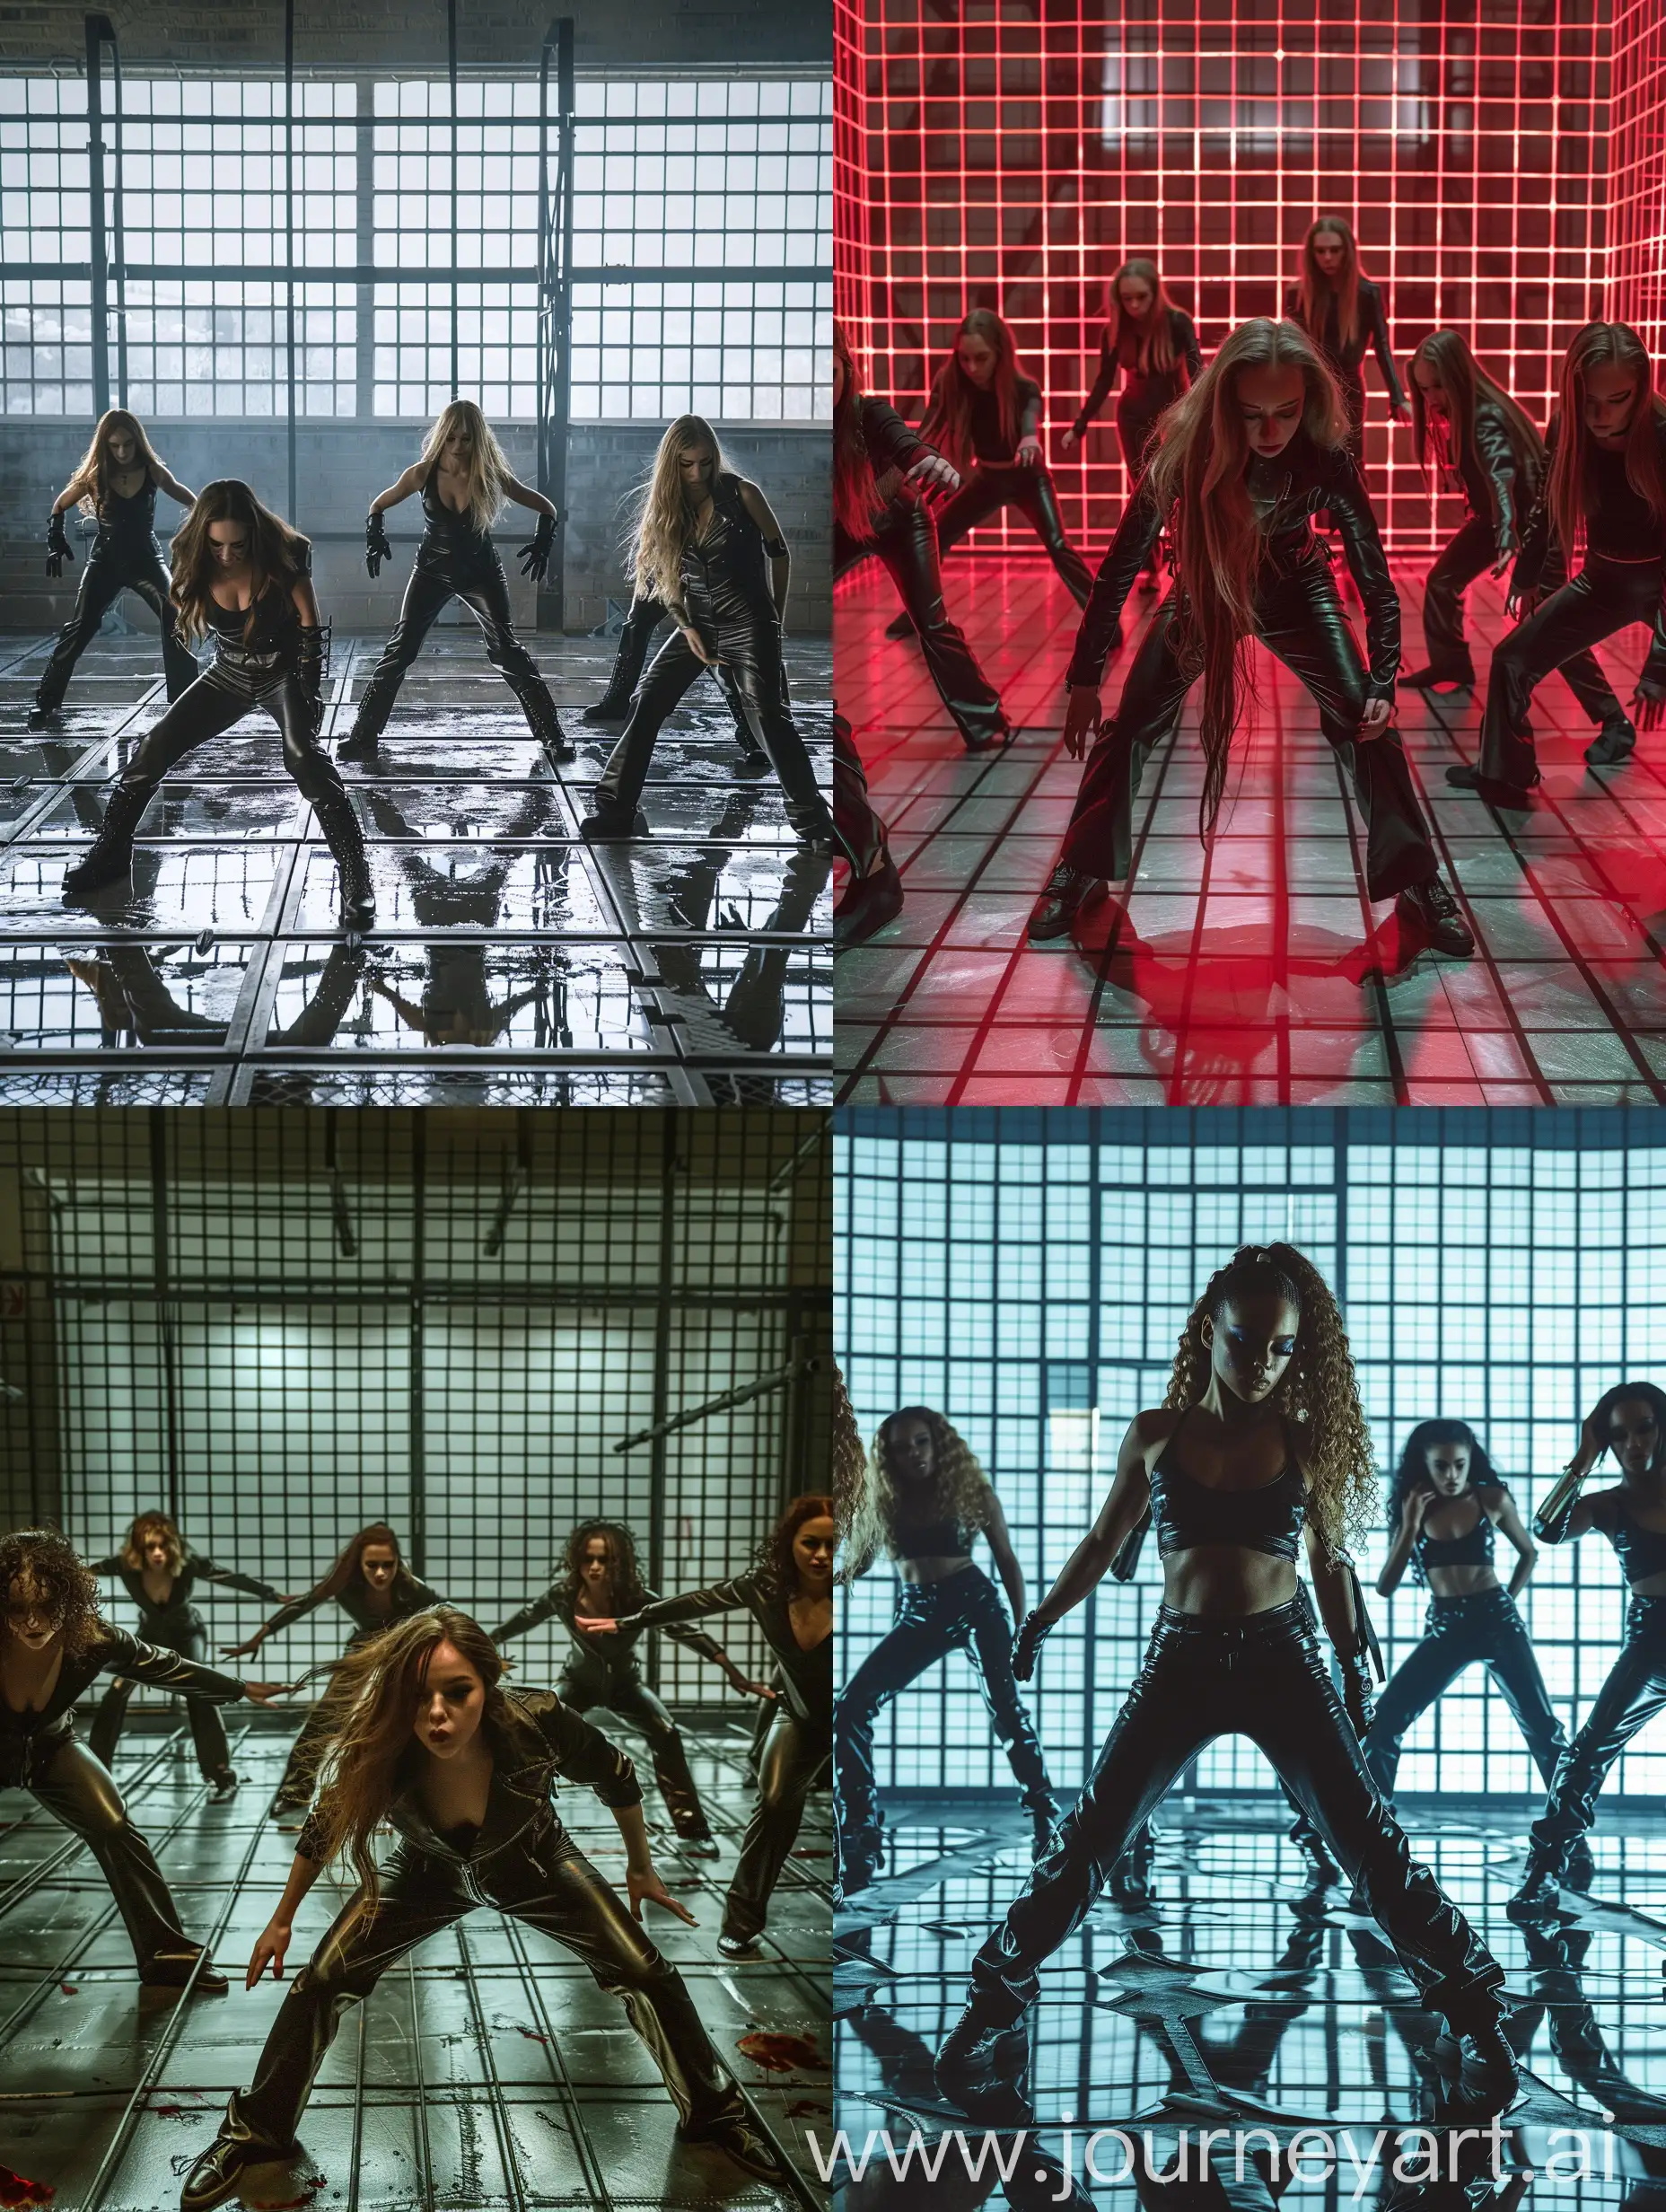 Edgy-Dance-Performance-in-Prison-Style-with-Girls-in-Leather